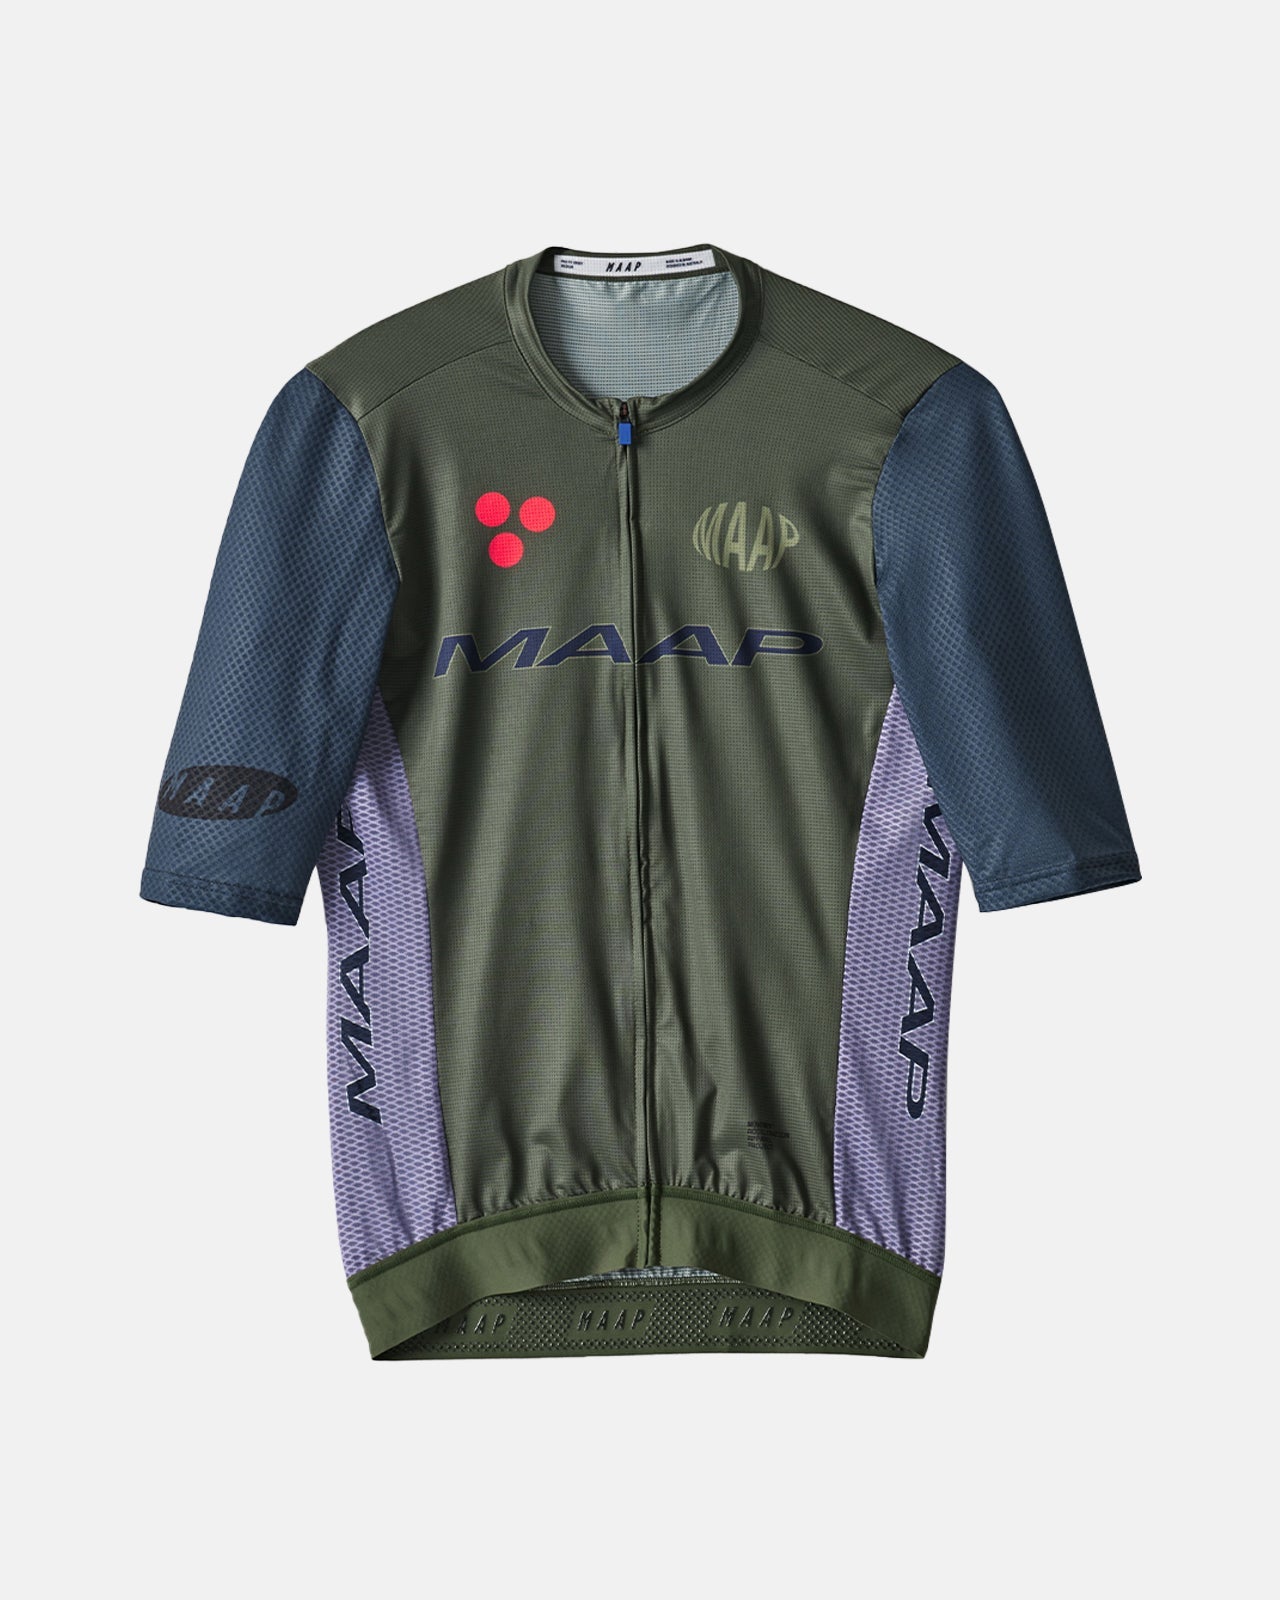 MAAP League Pro Air Jersey - Olive